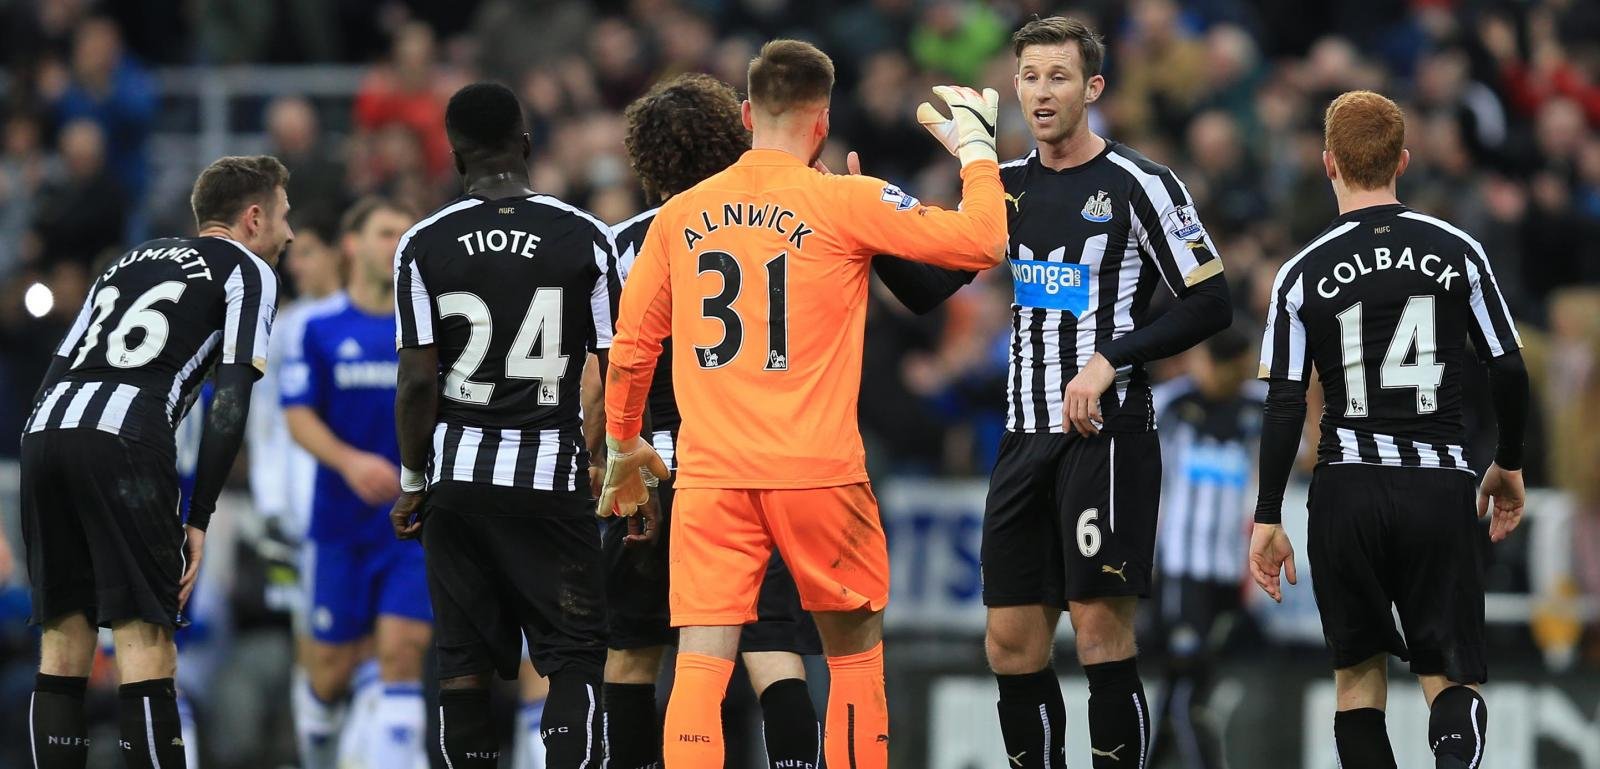 Newcastle fans staying cautious despite spending